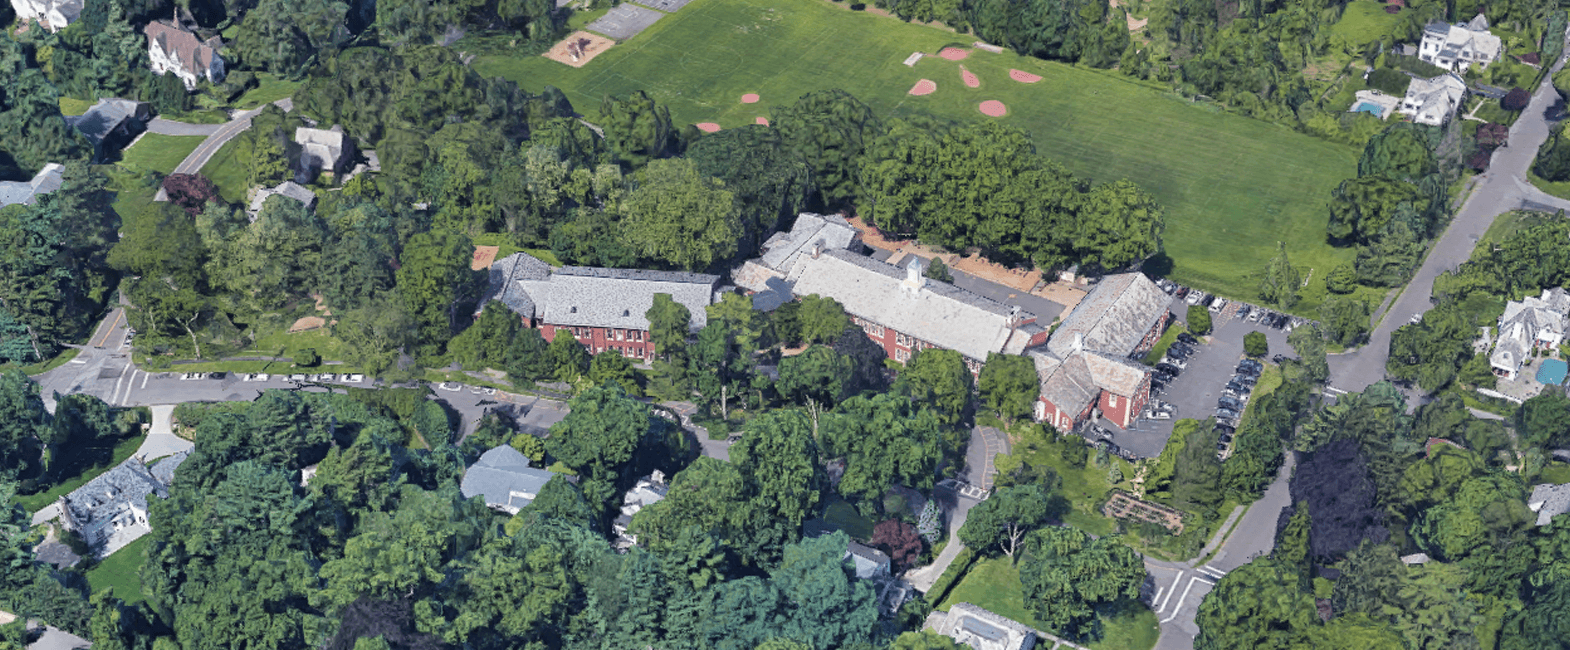 Search Real Estate Listings with Fox Meadow Elementary School District, part of the Scarsdale School District